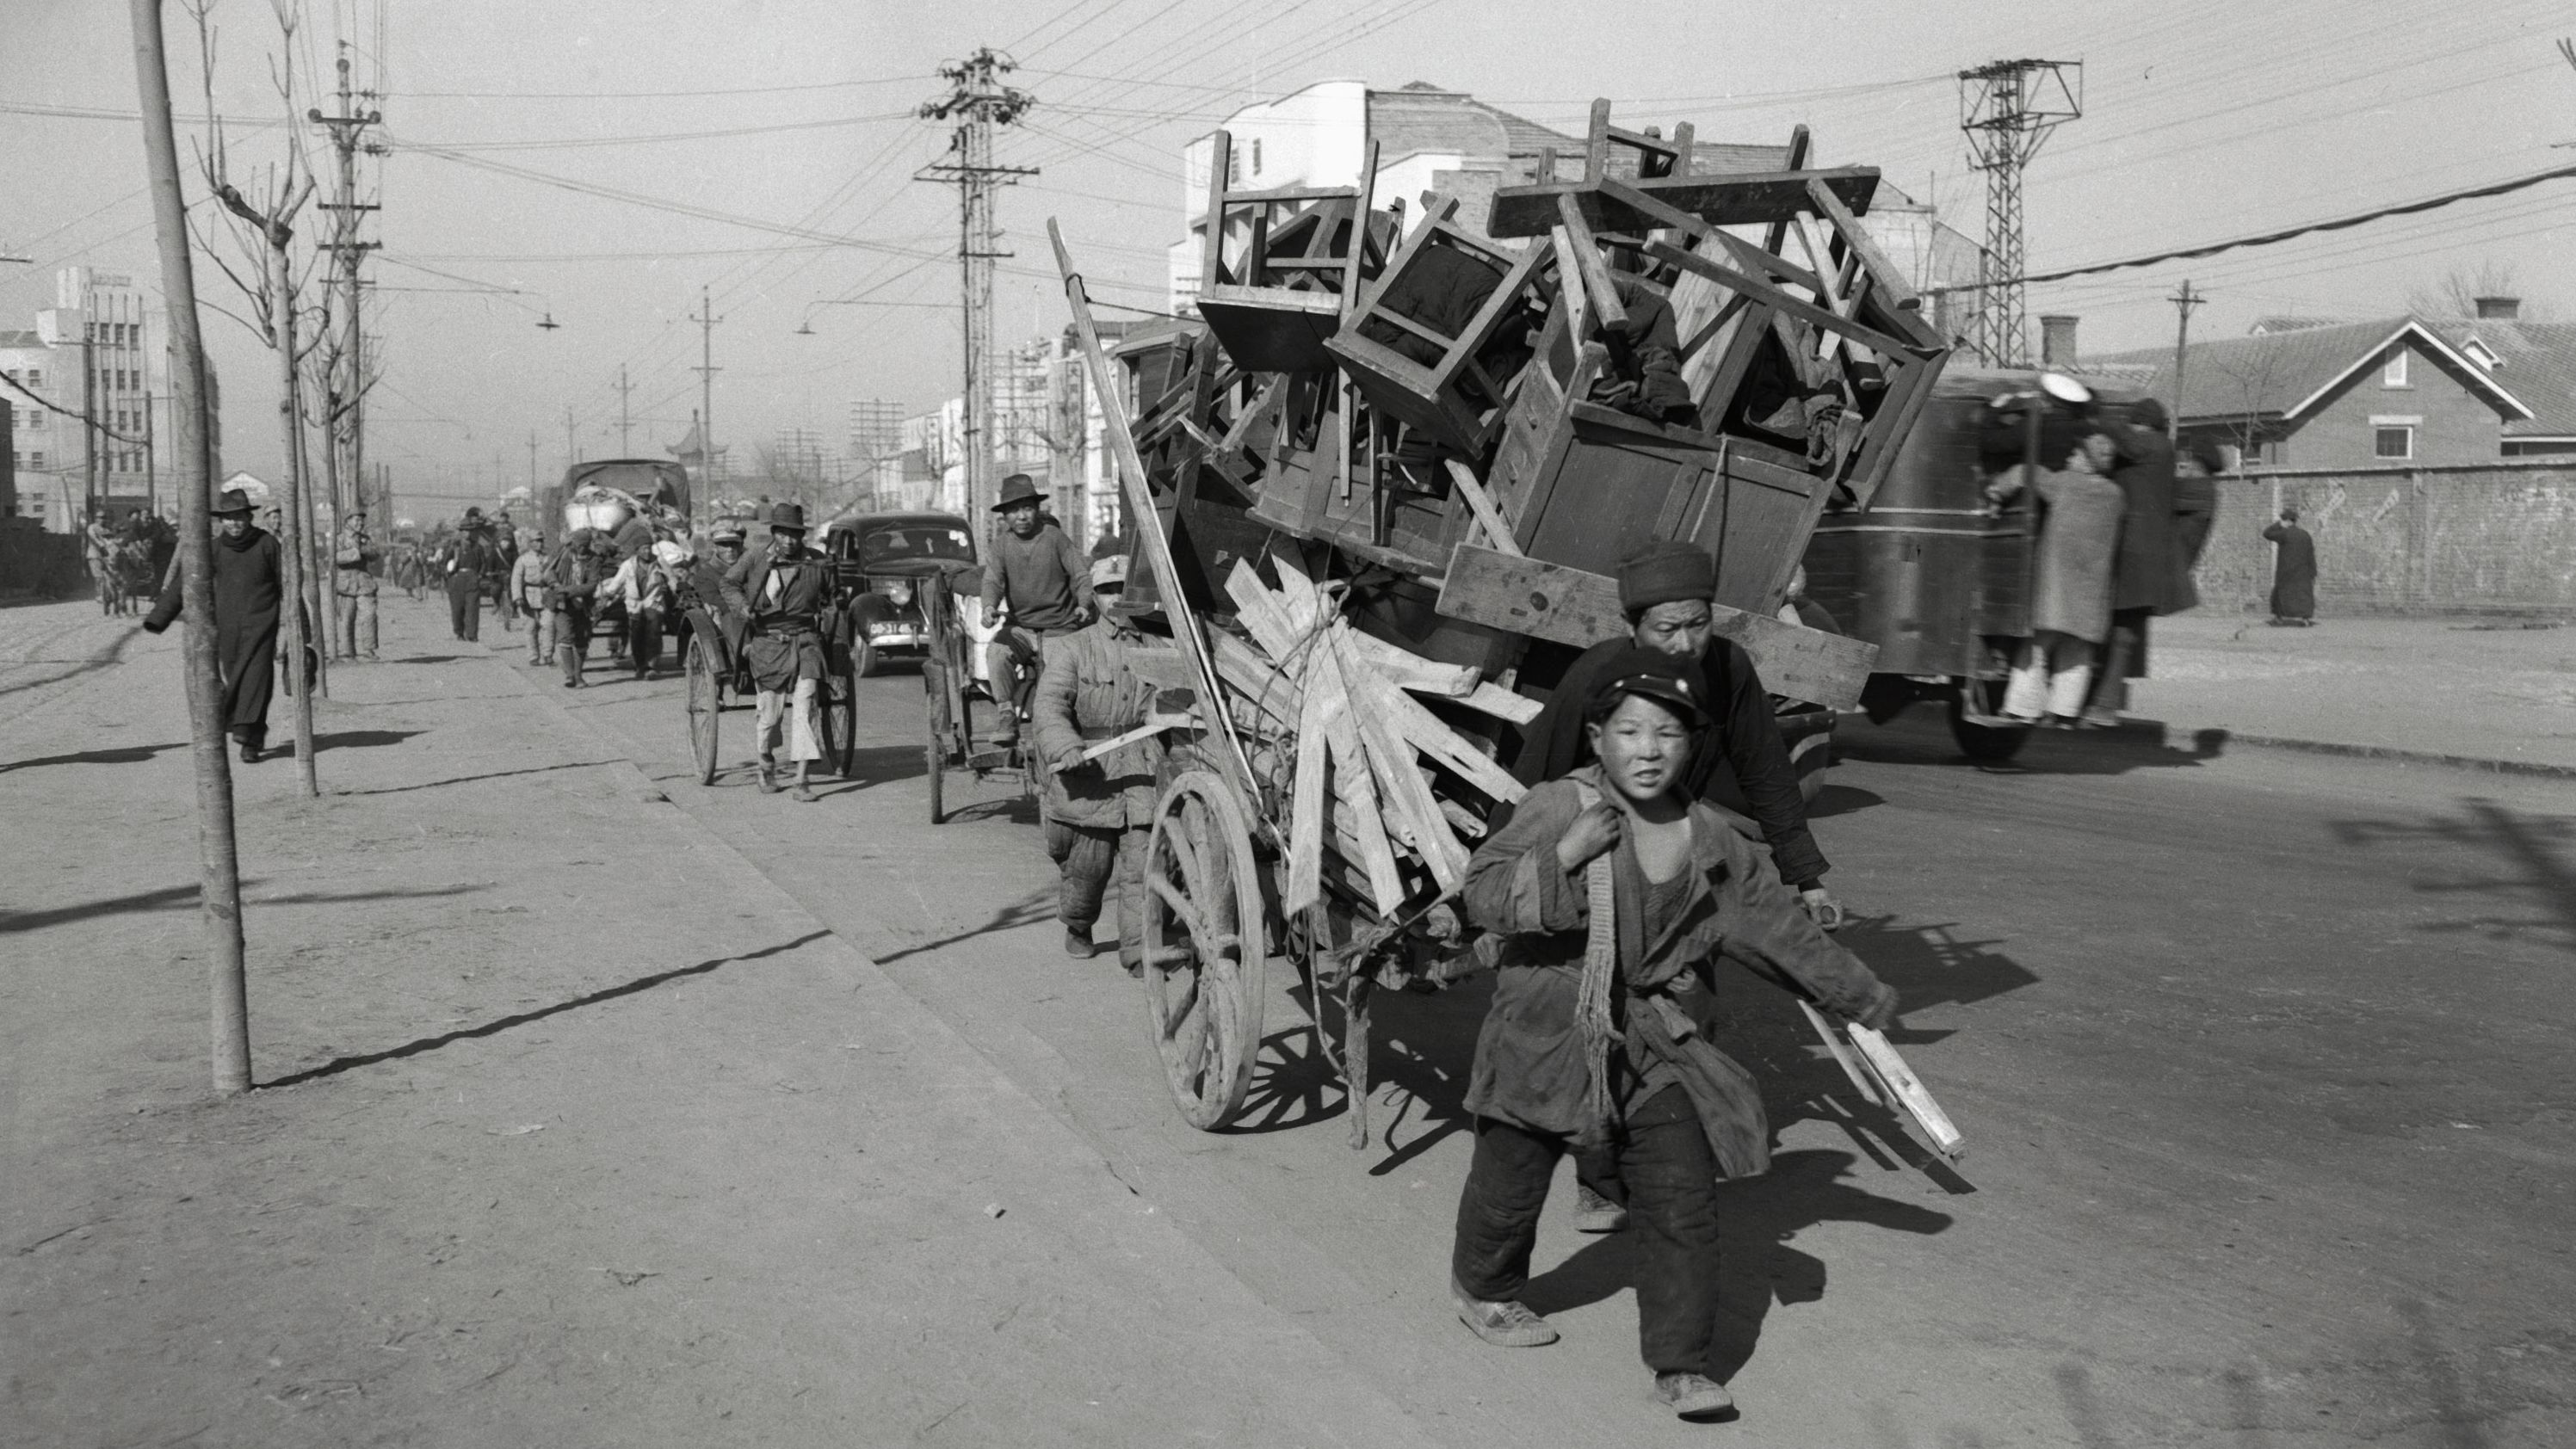 People in Nanking, China, flee with their belongings as communist forces advanced toward the city in February 1949. Nationalist armies had poured into the city for a last-ditch defense of their home base in what was then China's capital. The city fell to the Communists in April 1949.